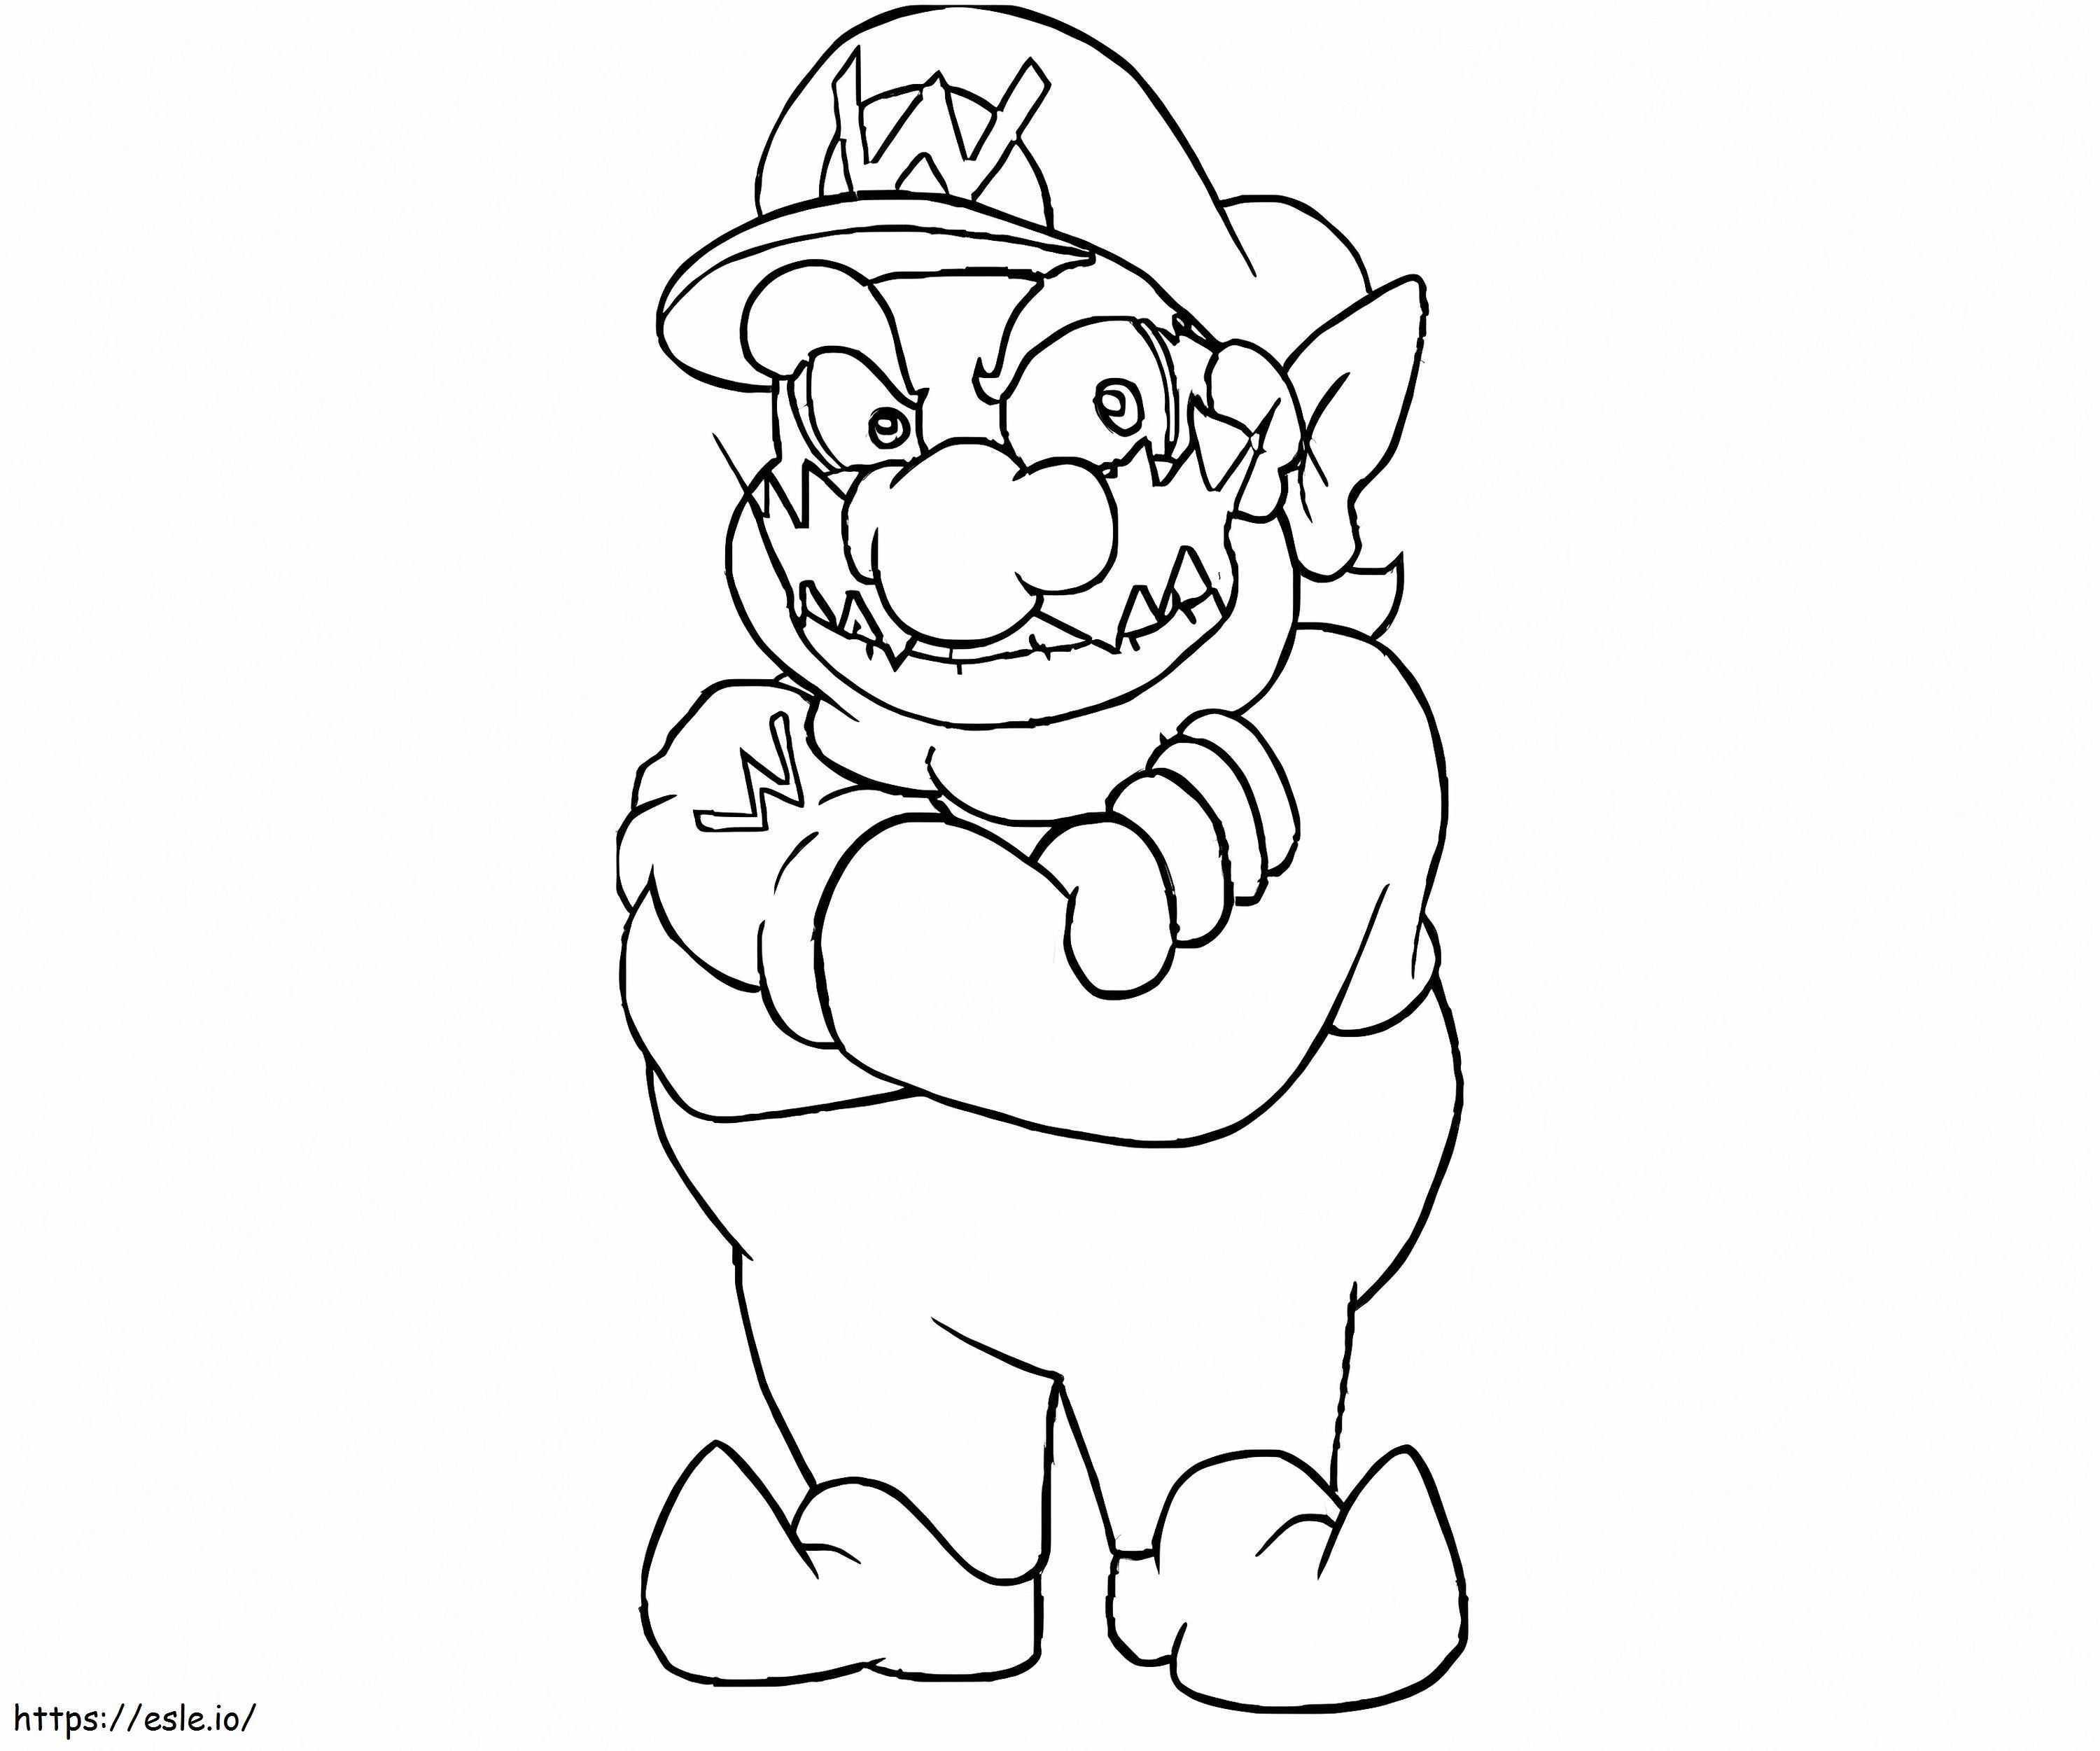 Standing Wario coloring page